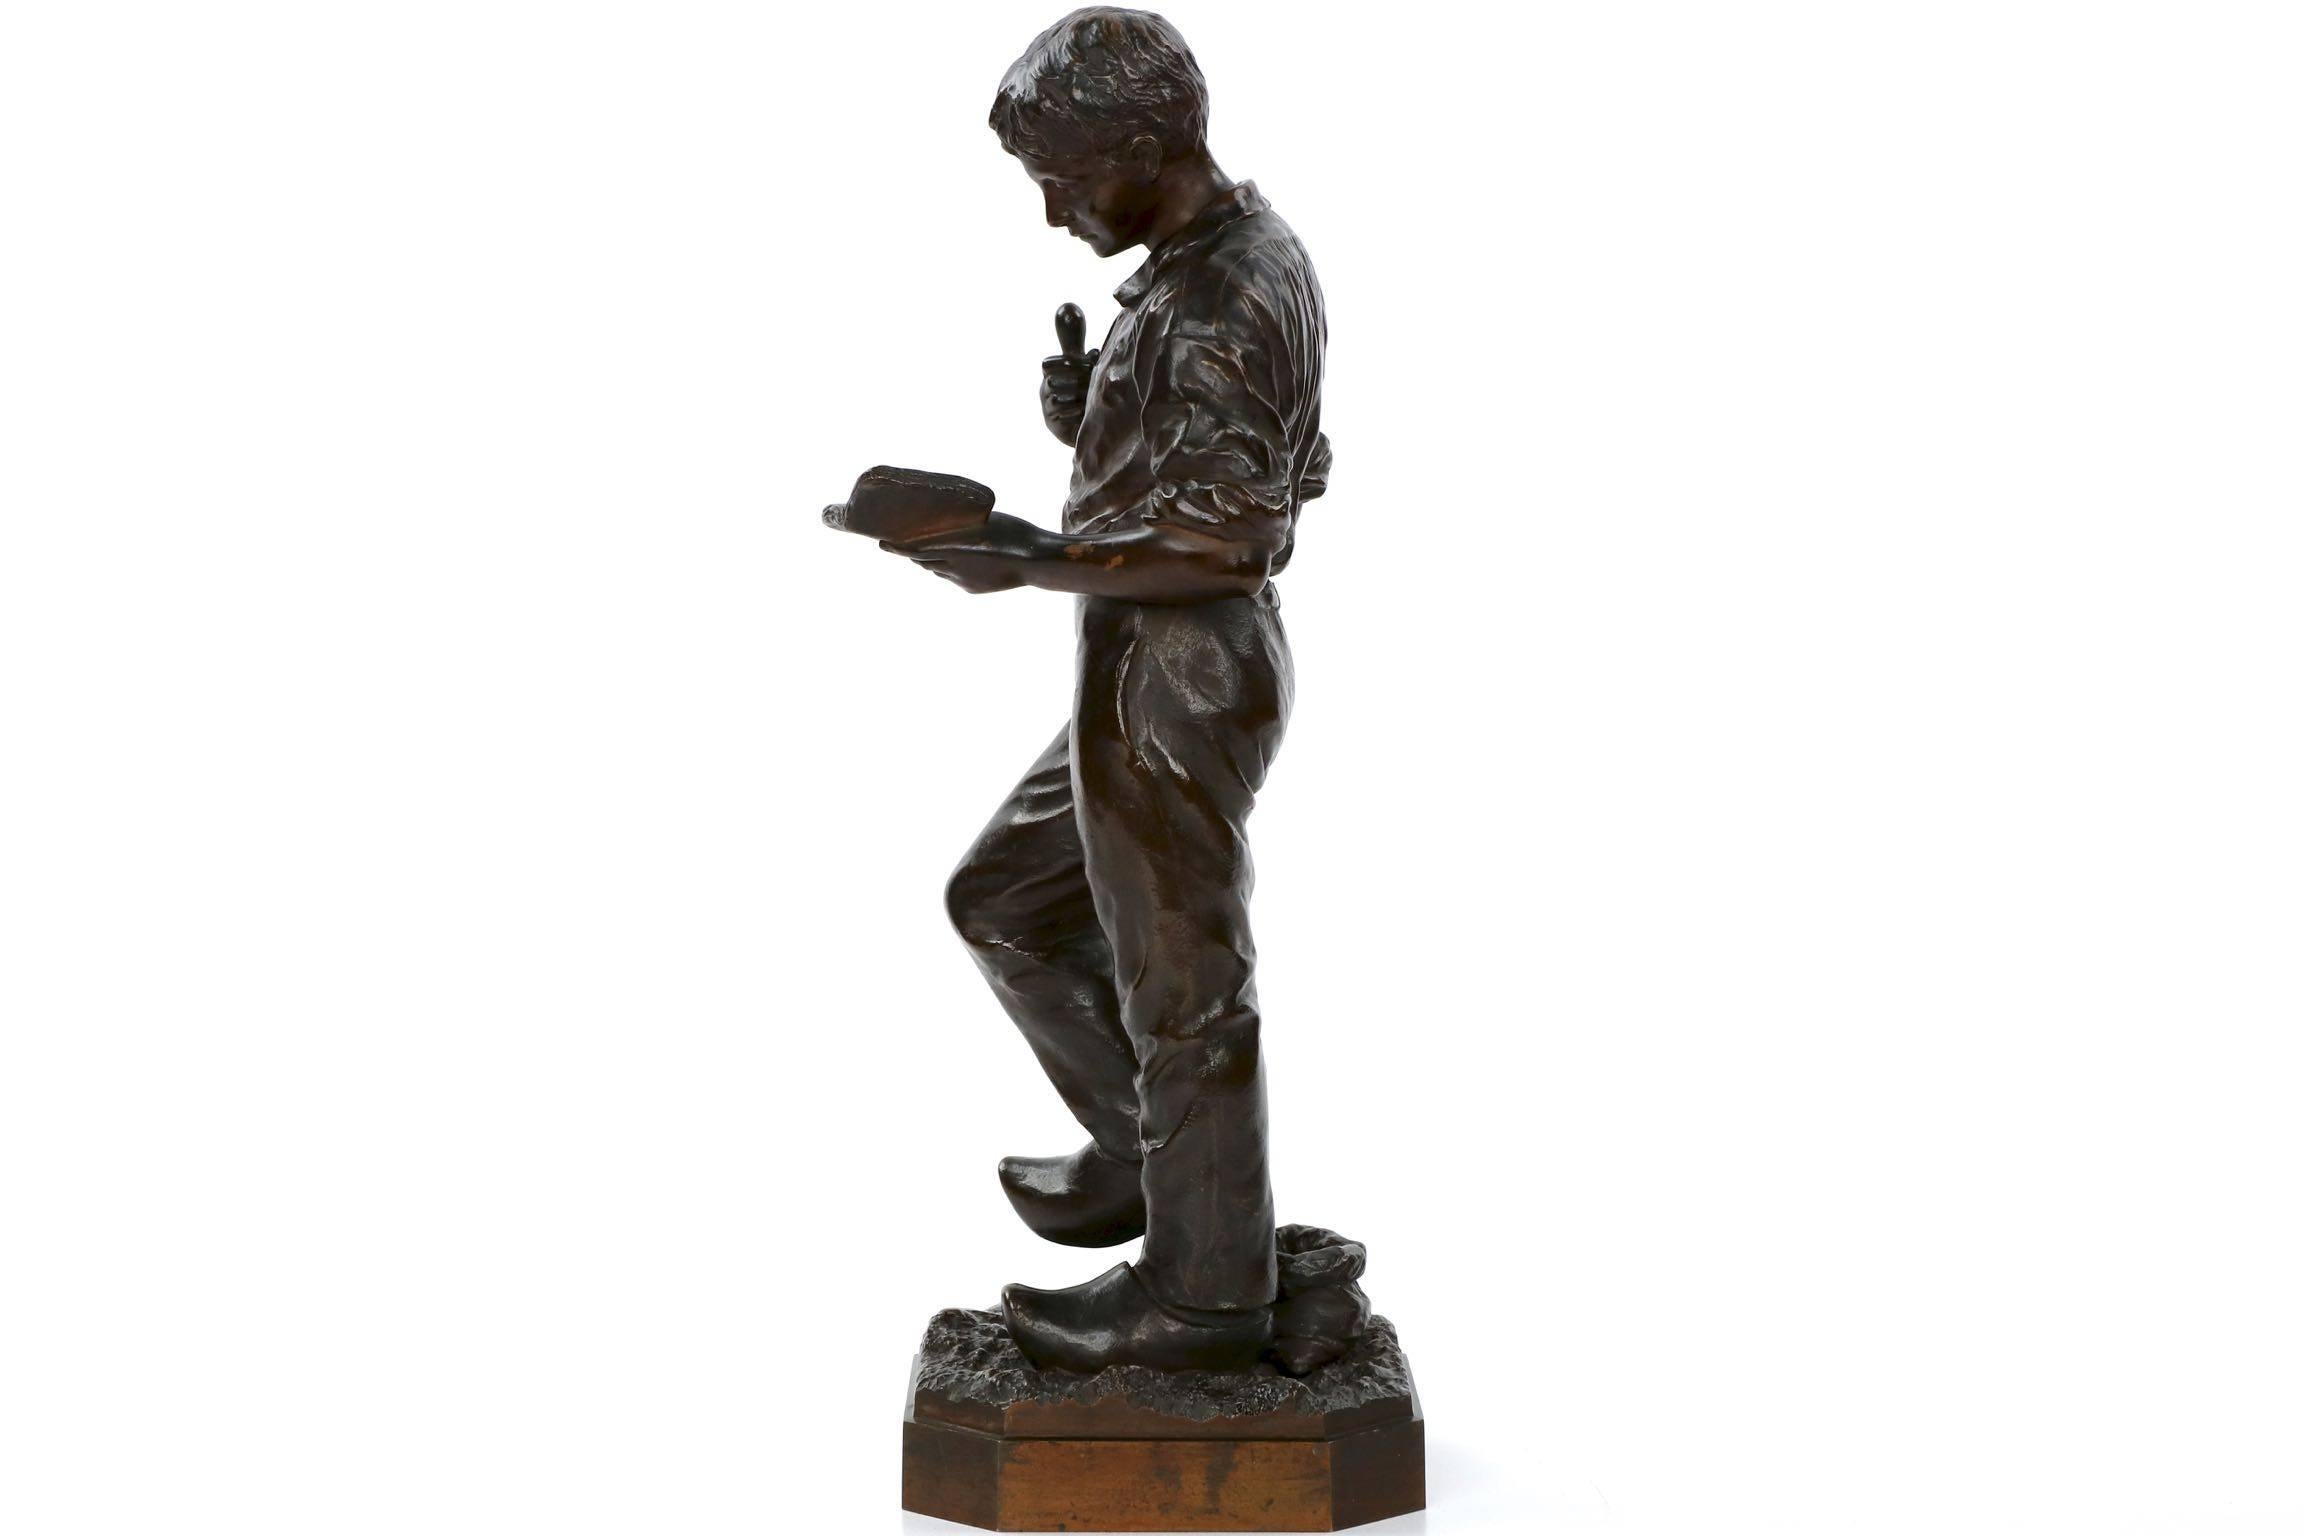 20th Century French Bronze Sculpture of Laborer Studying by Hippolyte Peyrol